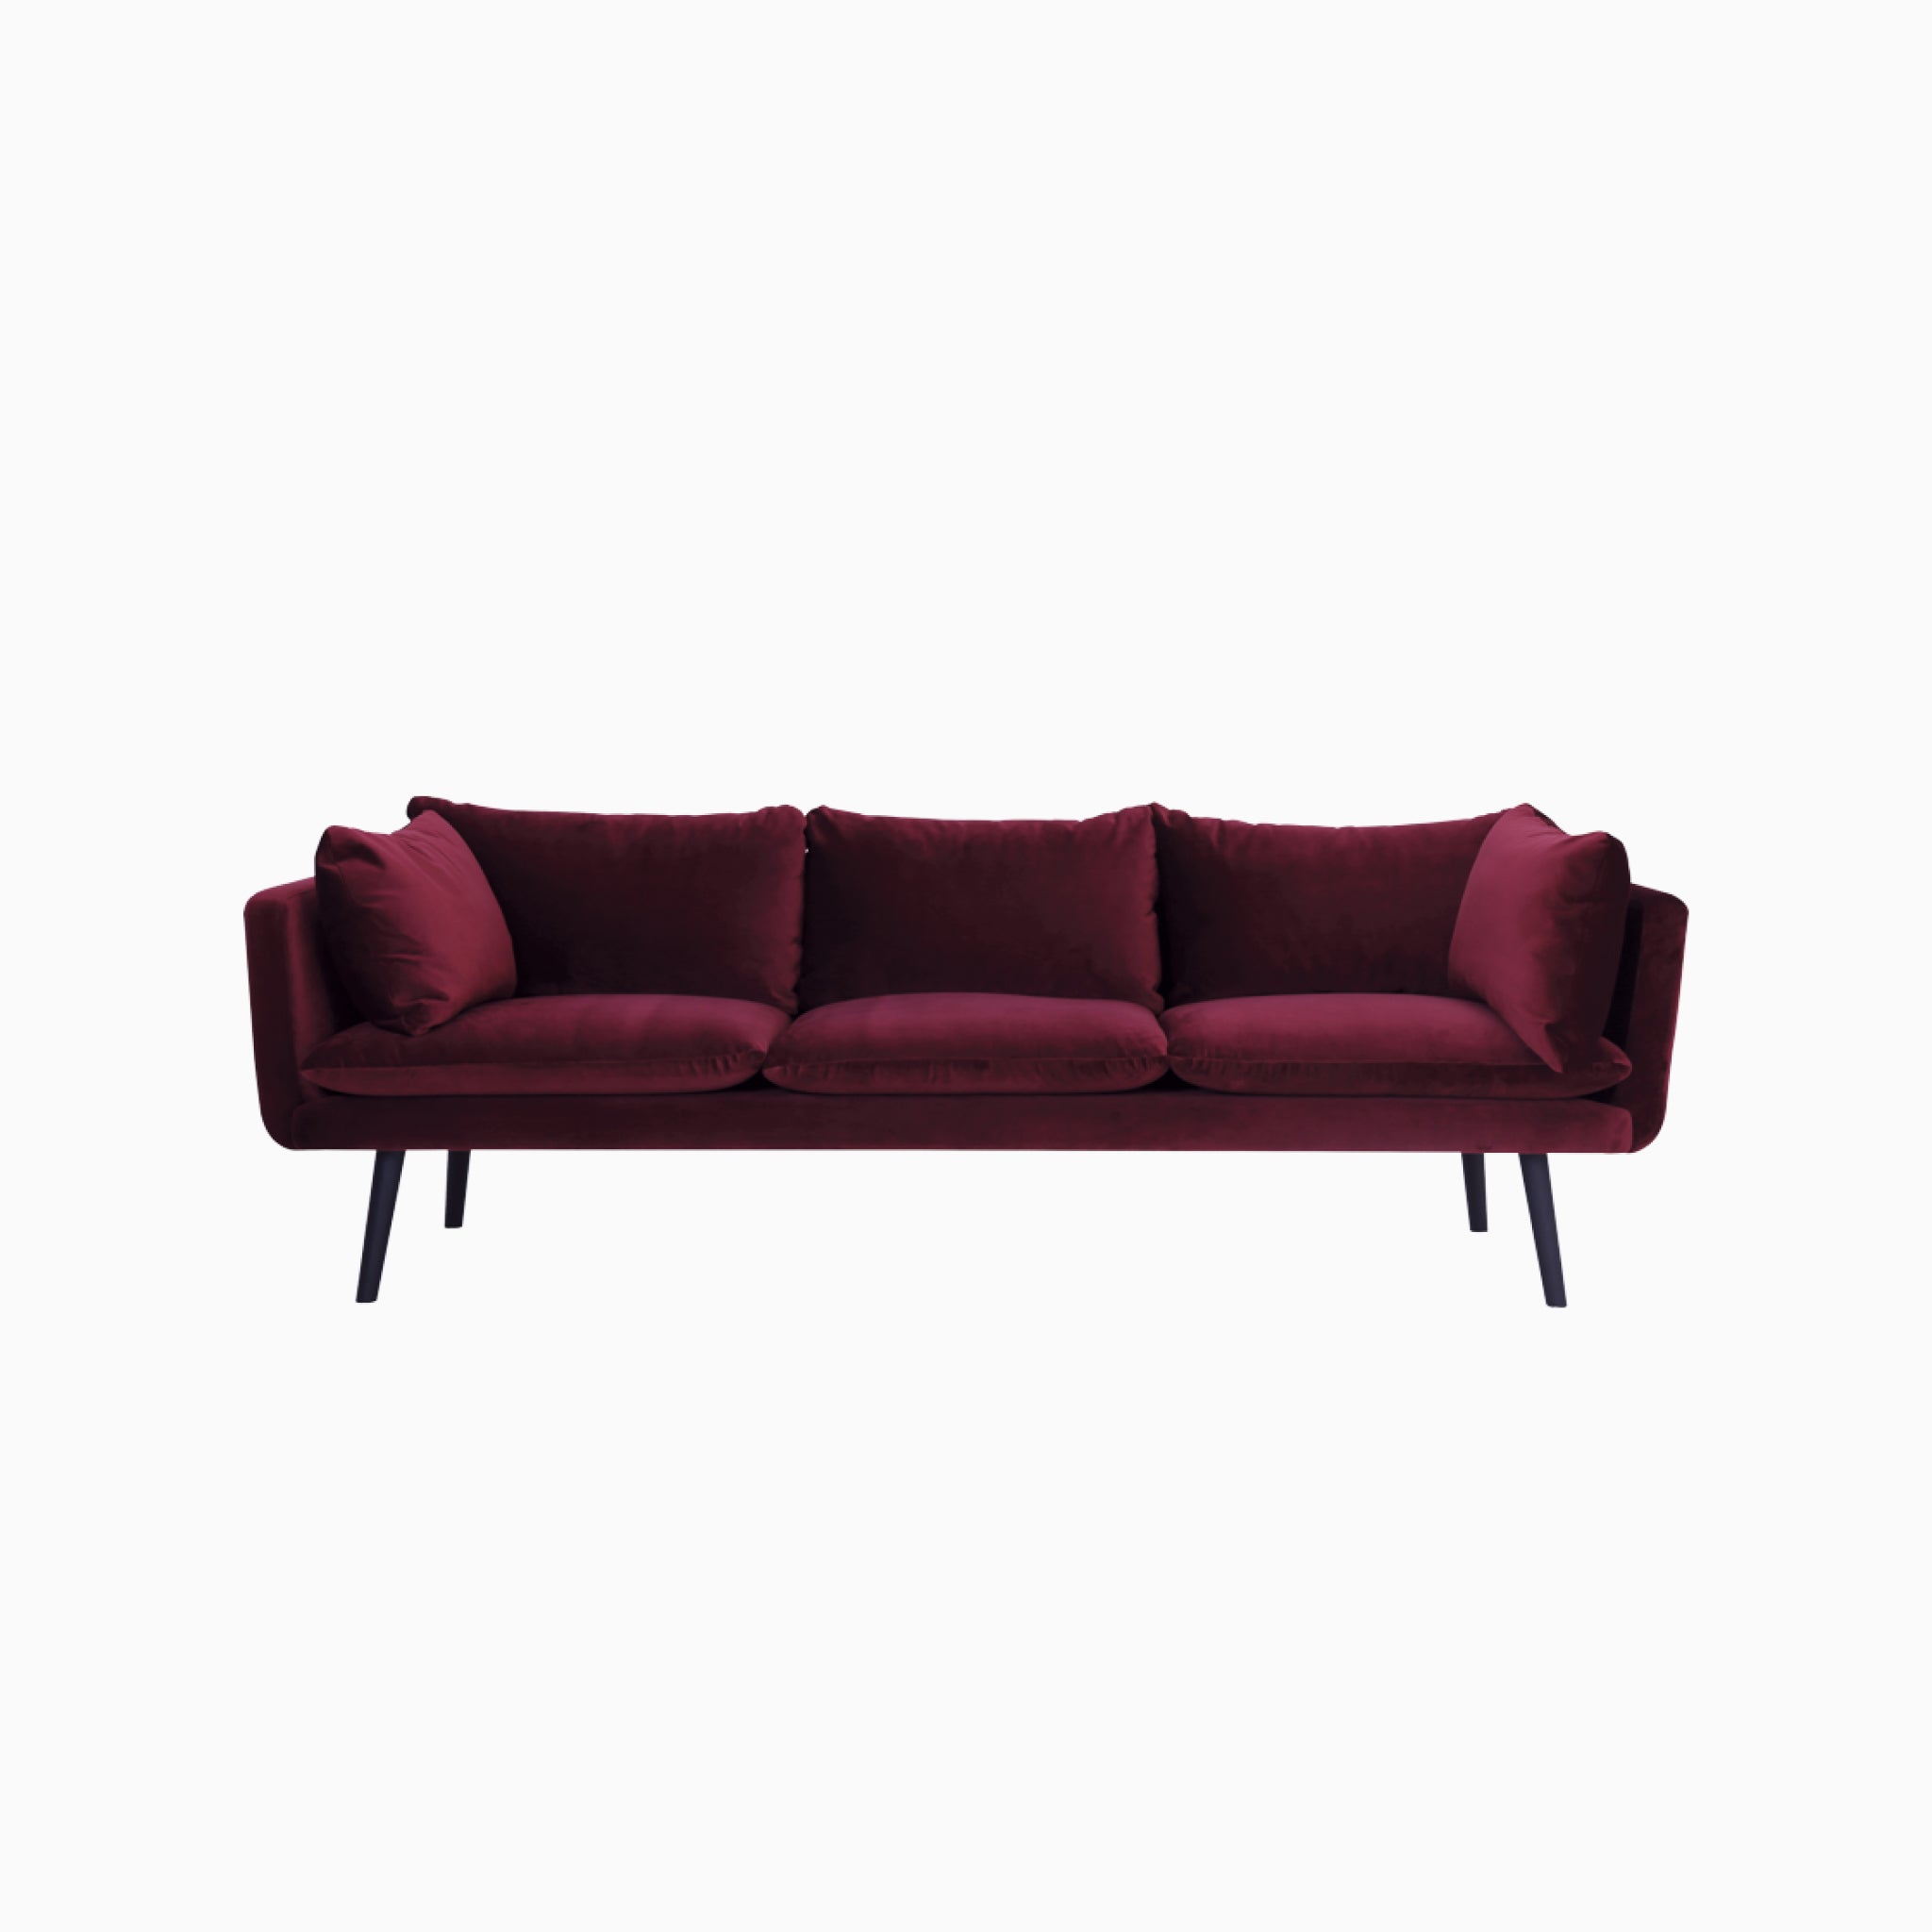 Nord 3 Seater Sofa with Saxony Fabric